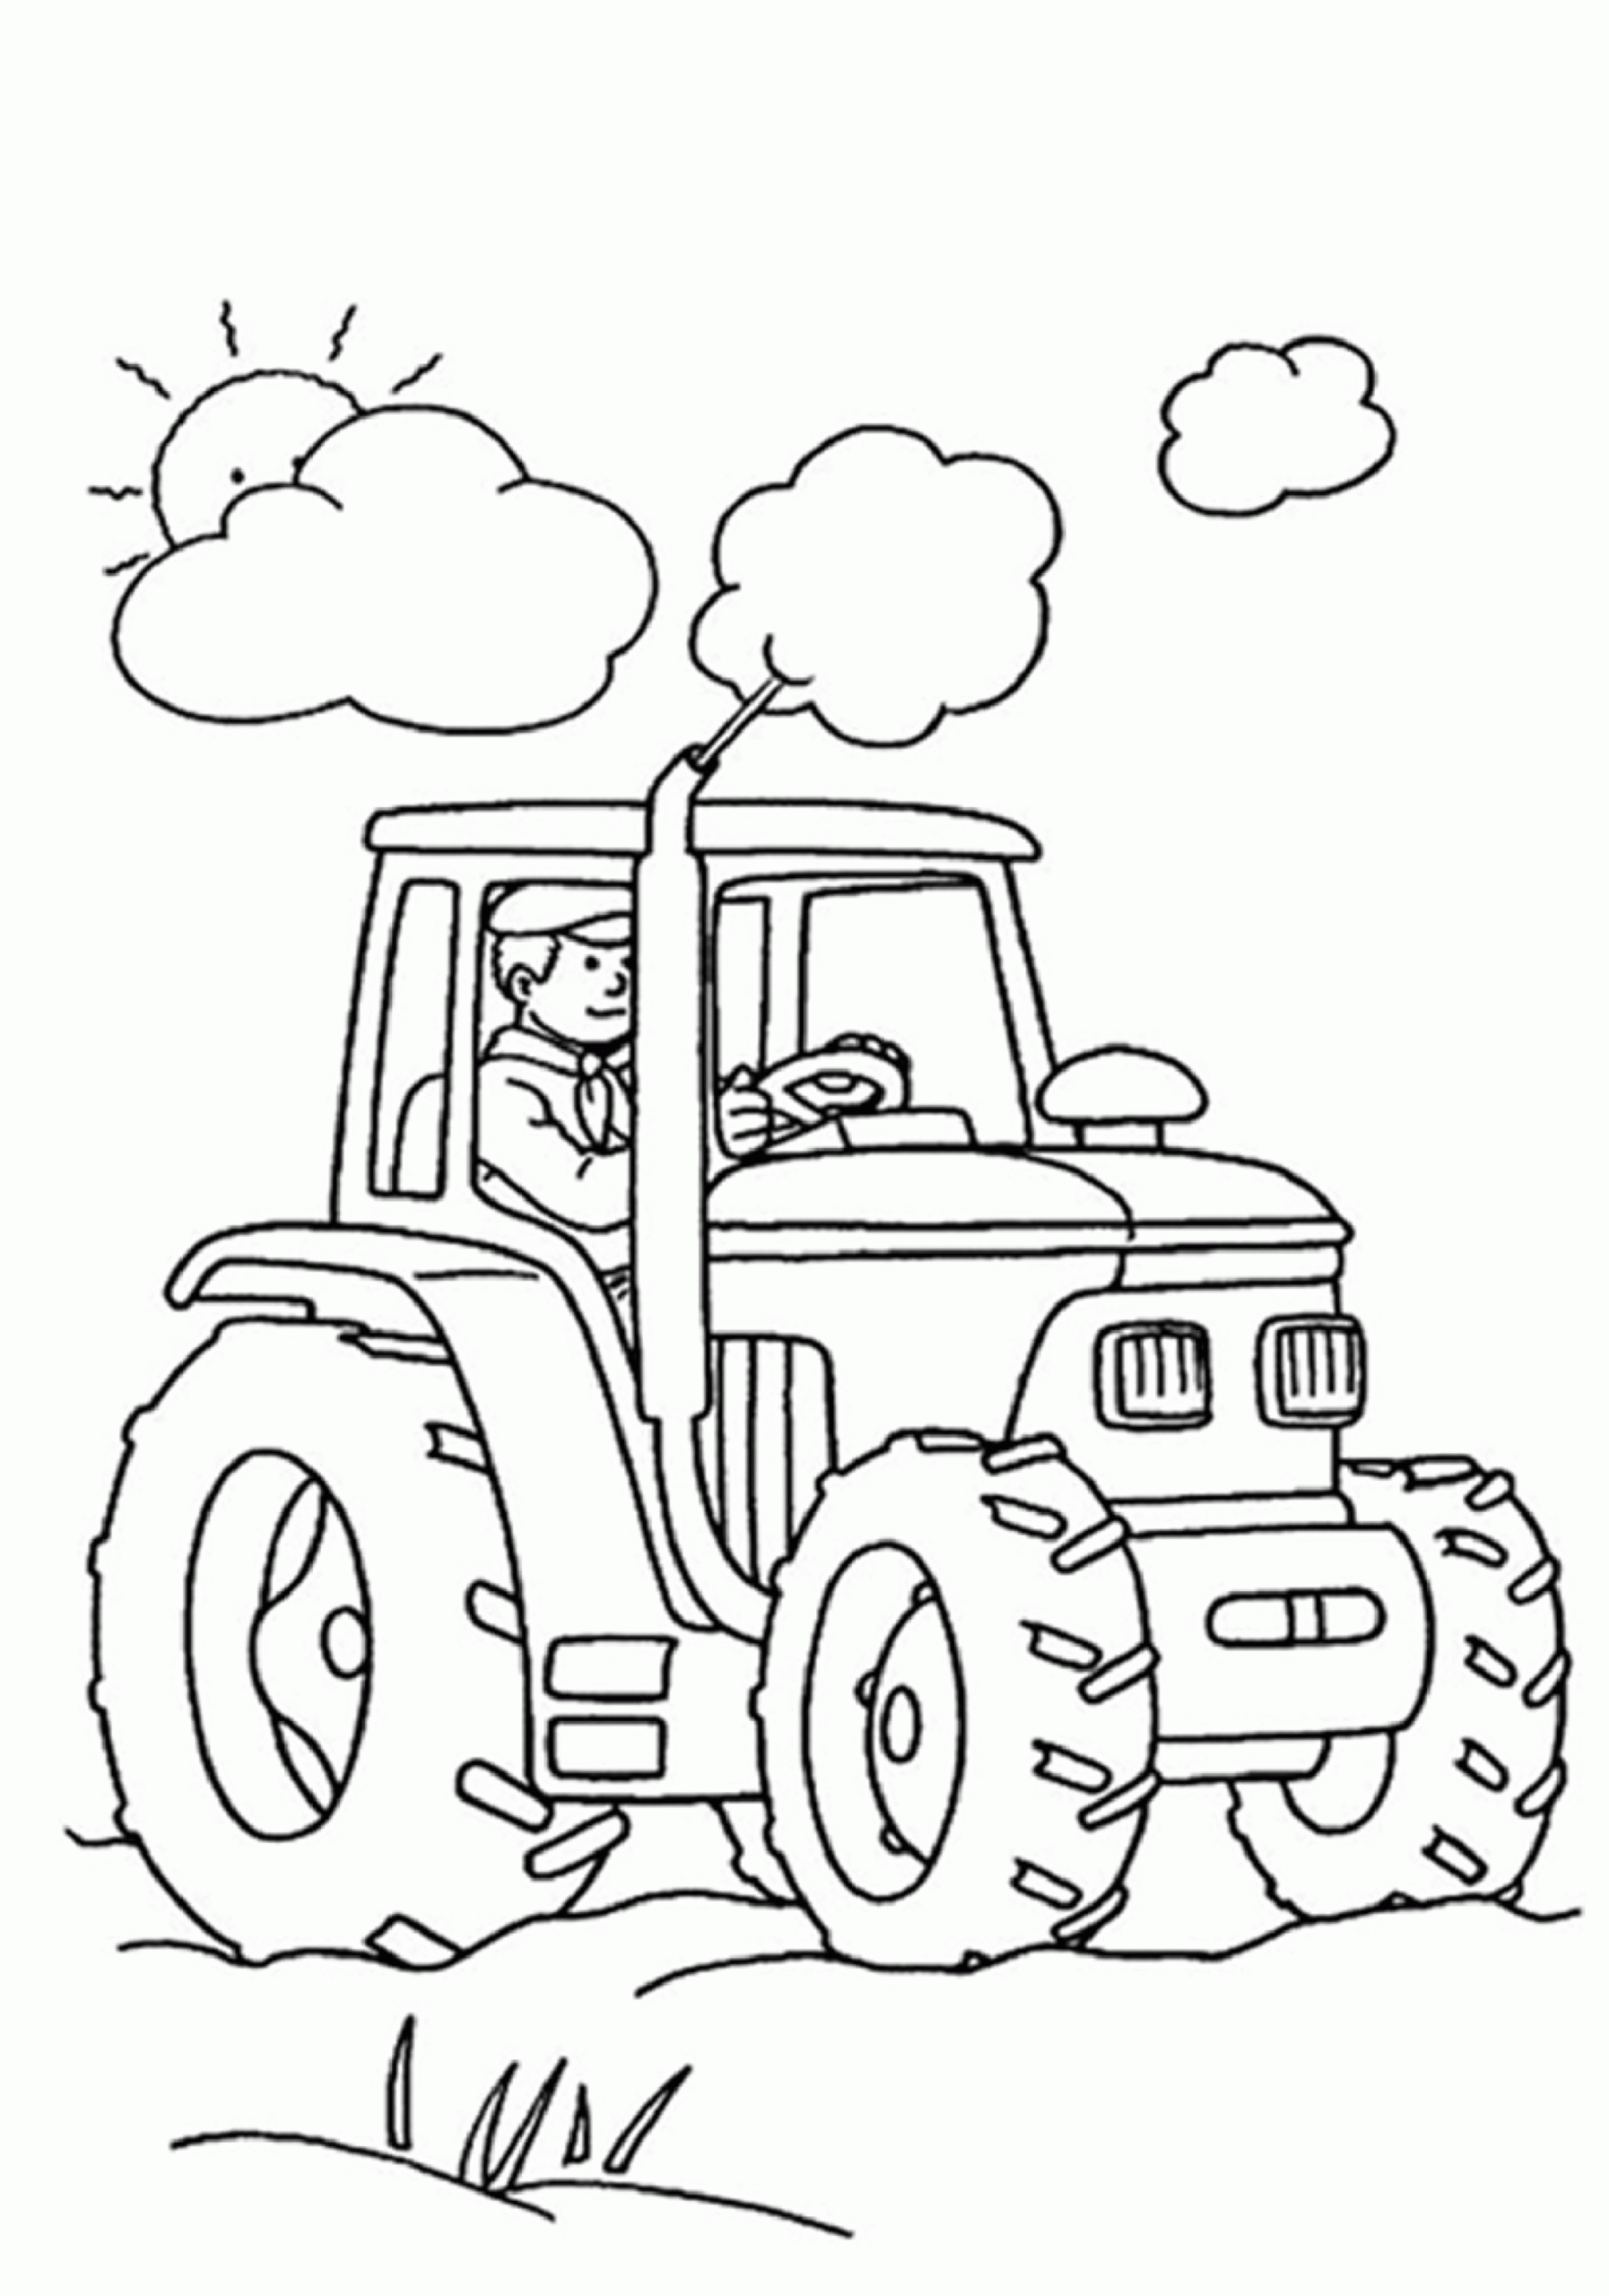 Printable Coloring Sheets For Boys
 Coloring Lab